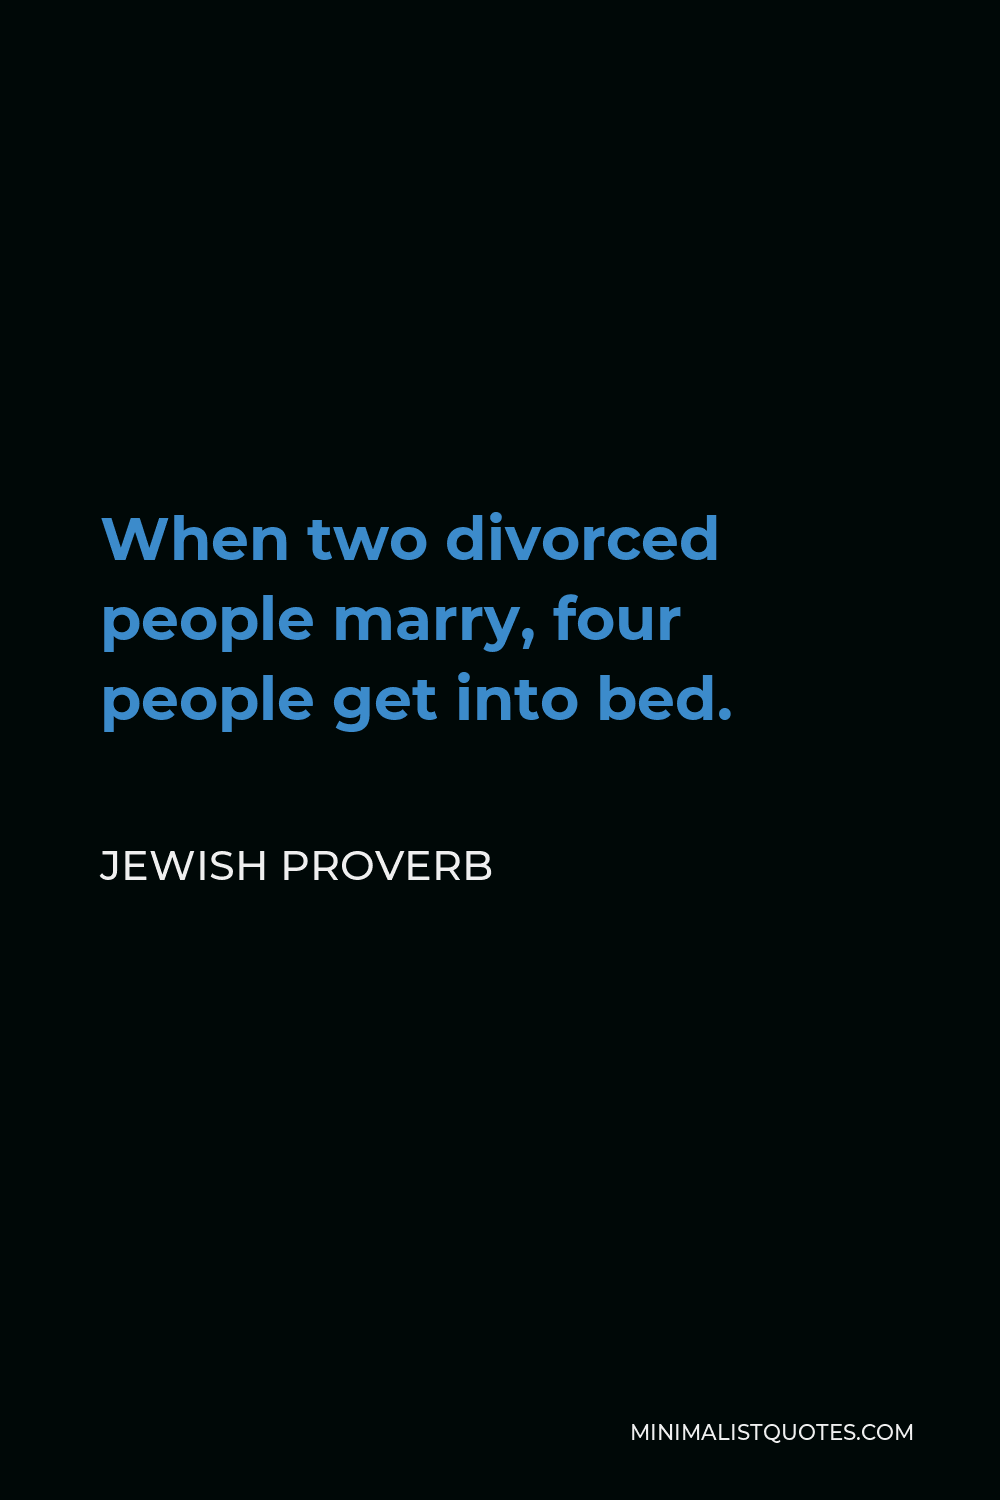 Jewish Proverb Quote - When two divorced people marry, four people get into bed.